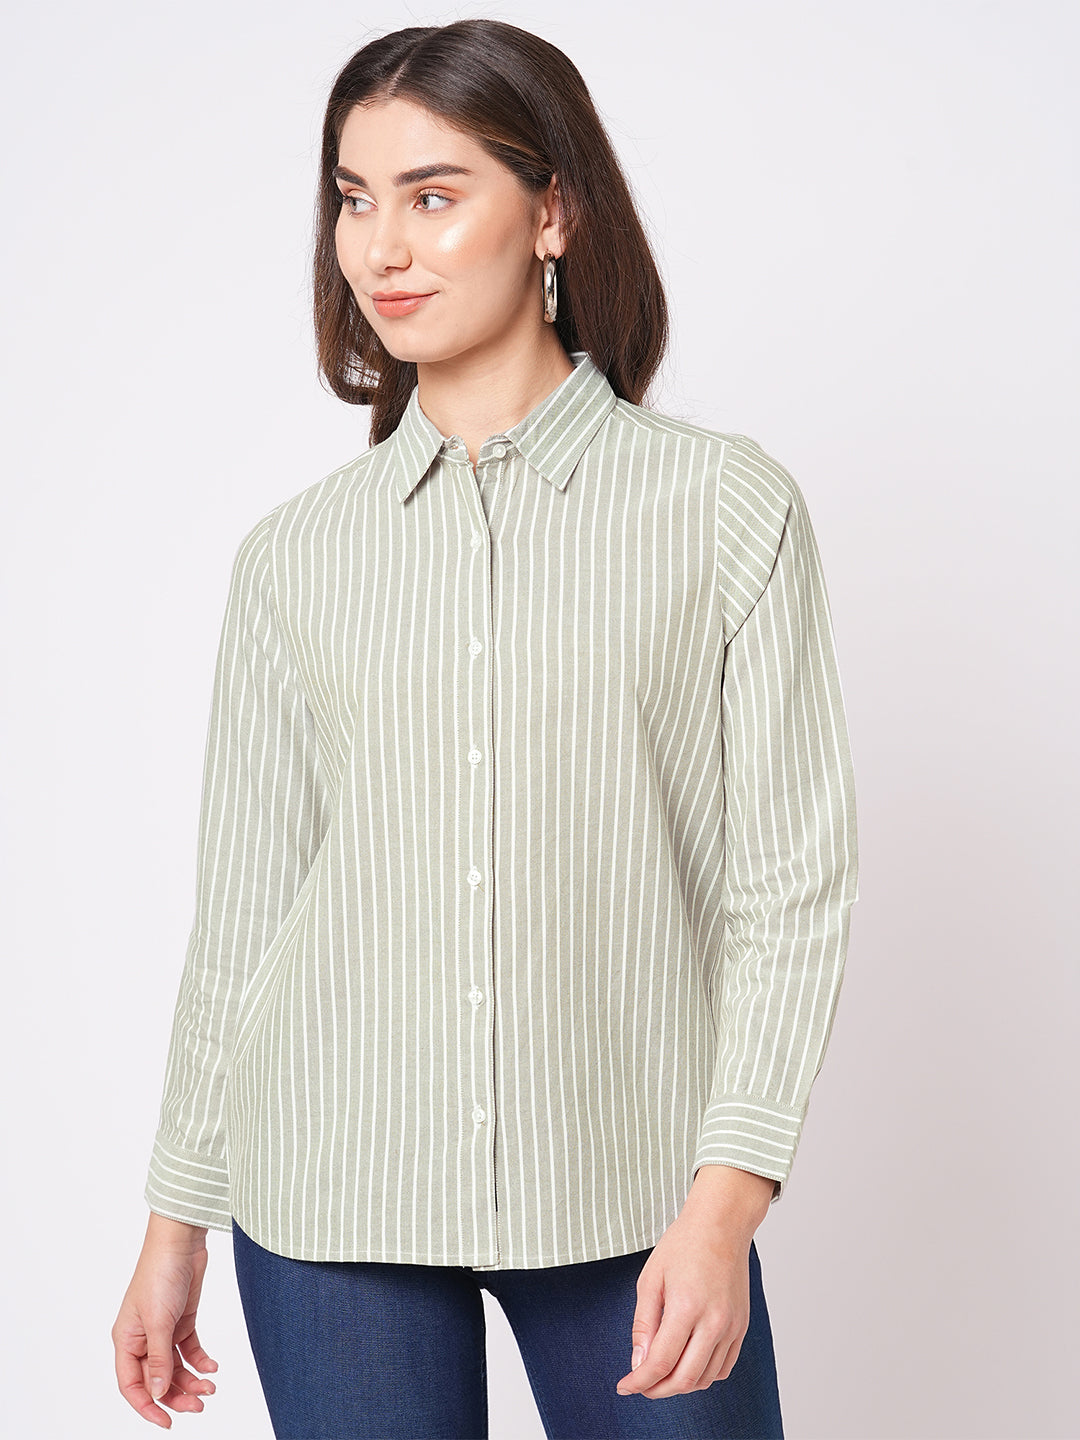 Bombay High Women's Sage Green Premium Cotton Striped Relaxed Fit Shirt